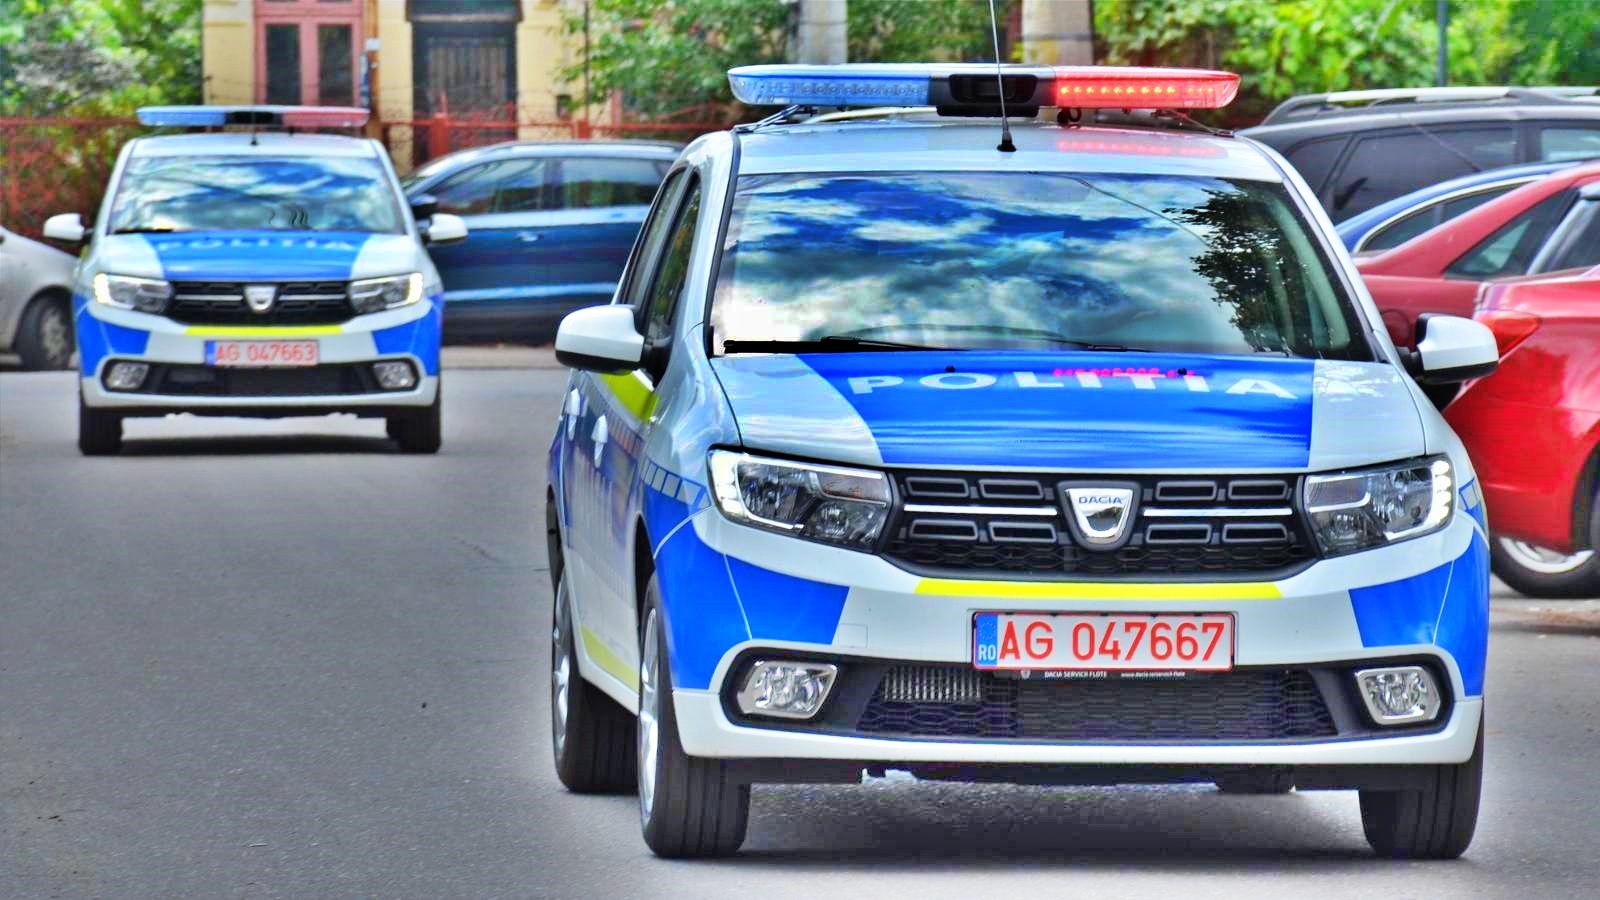 Romanian Police Measures Taken to Prevent the Spread of COVID-19